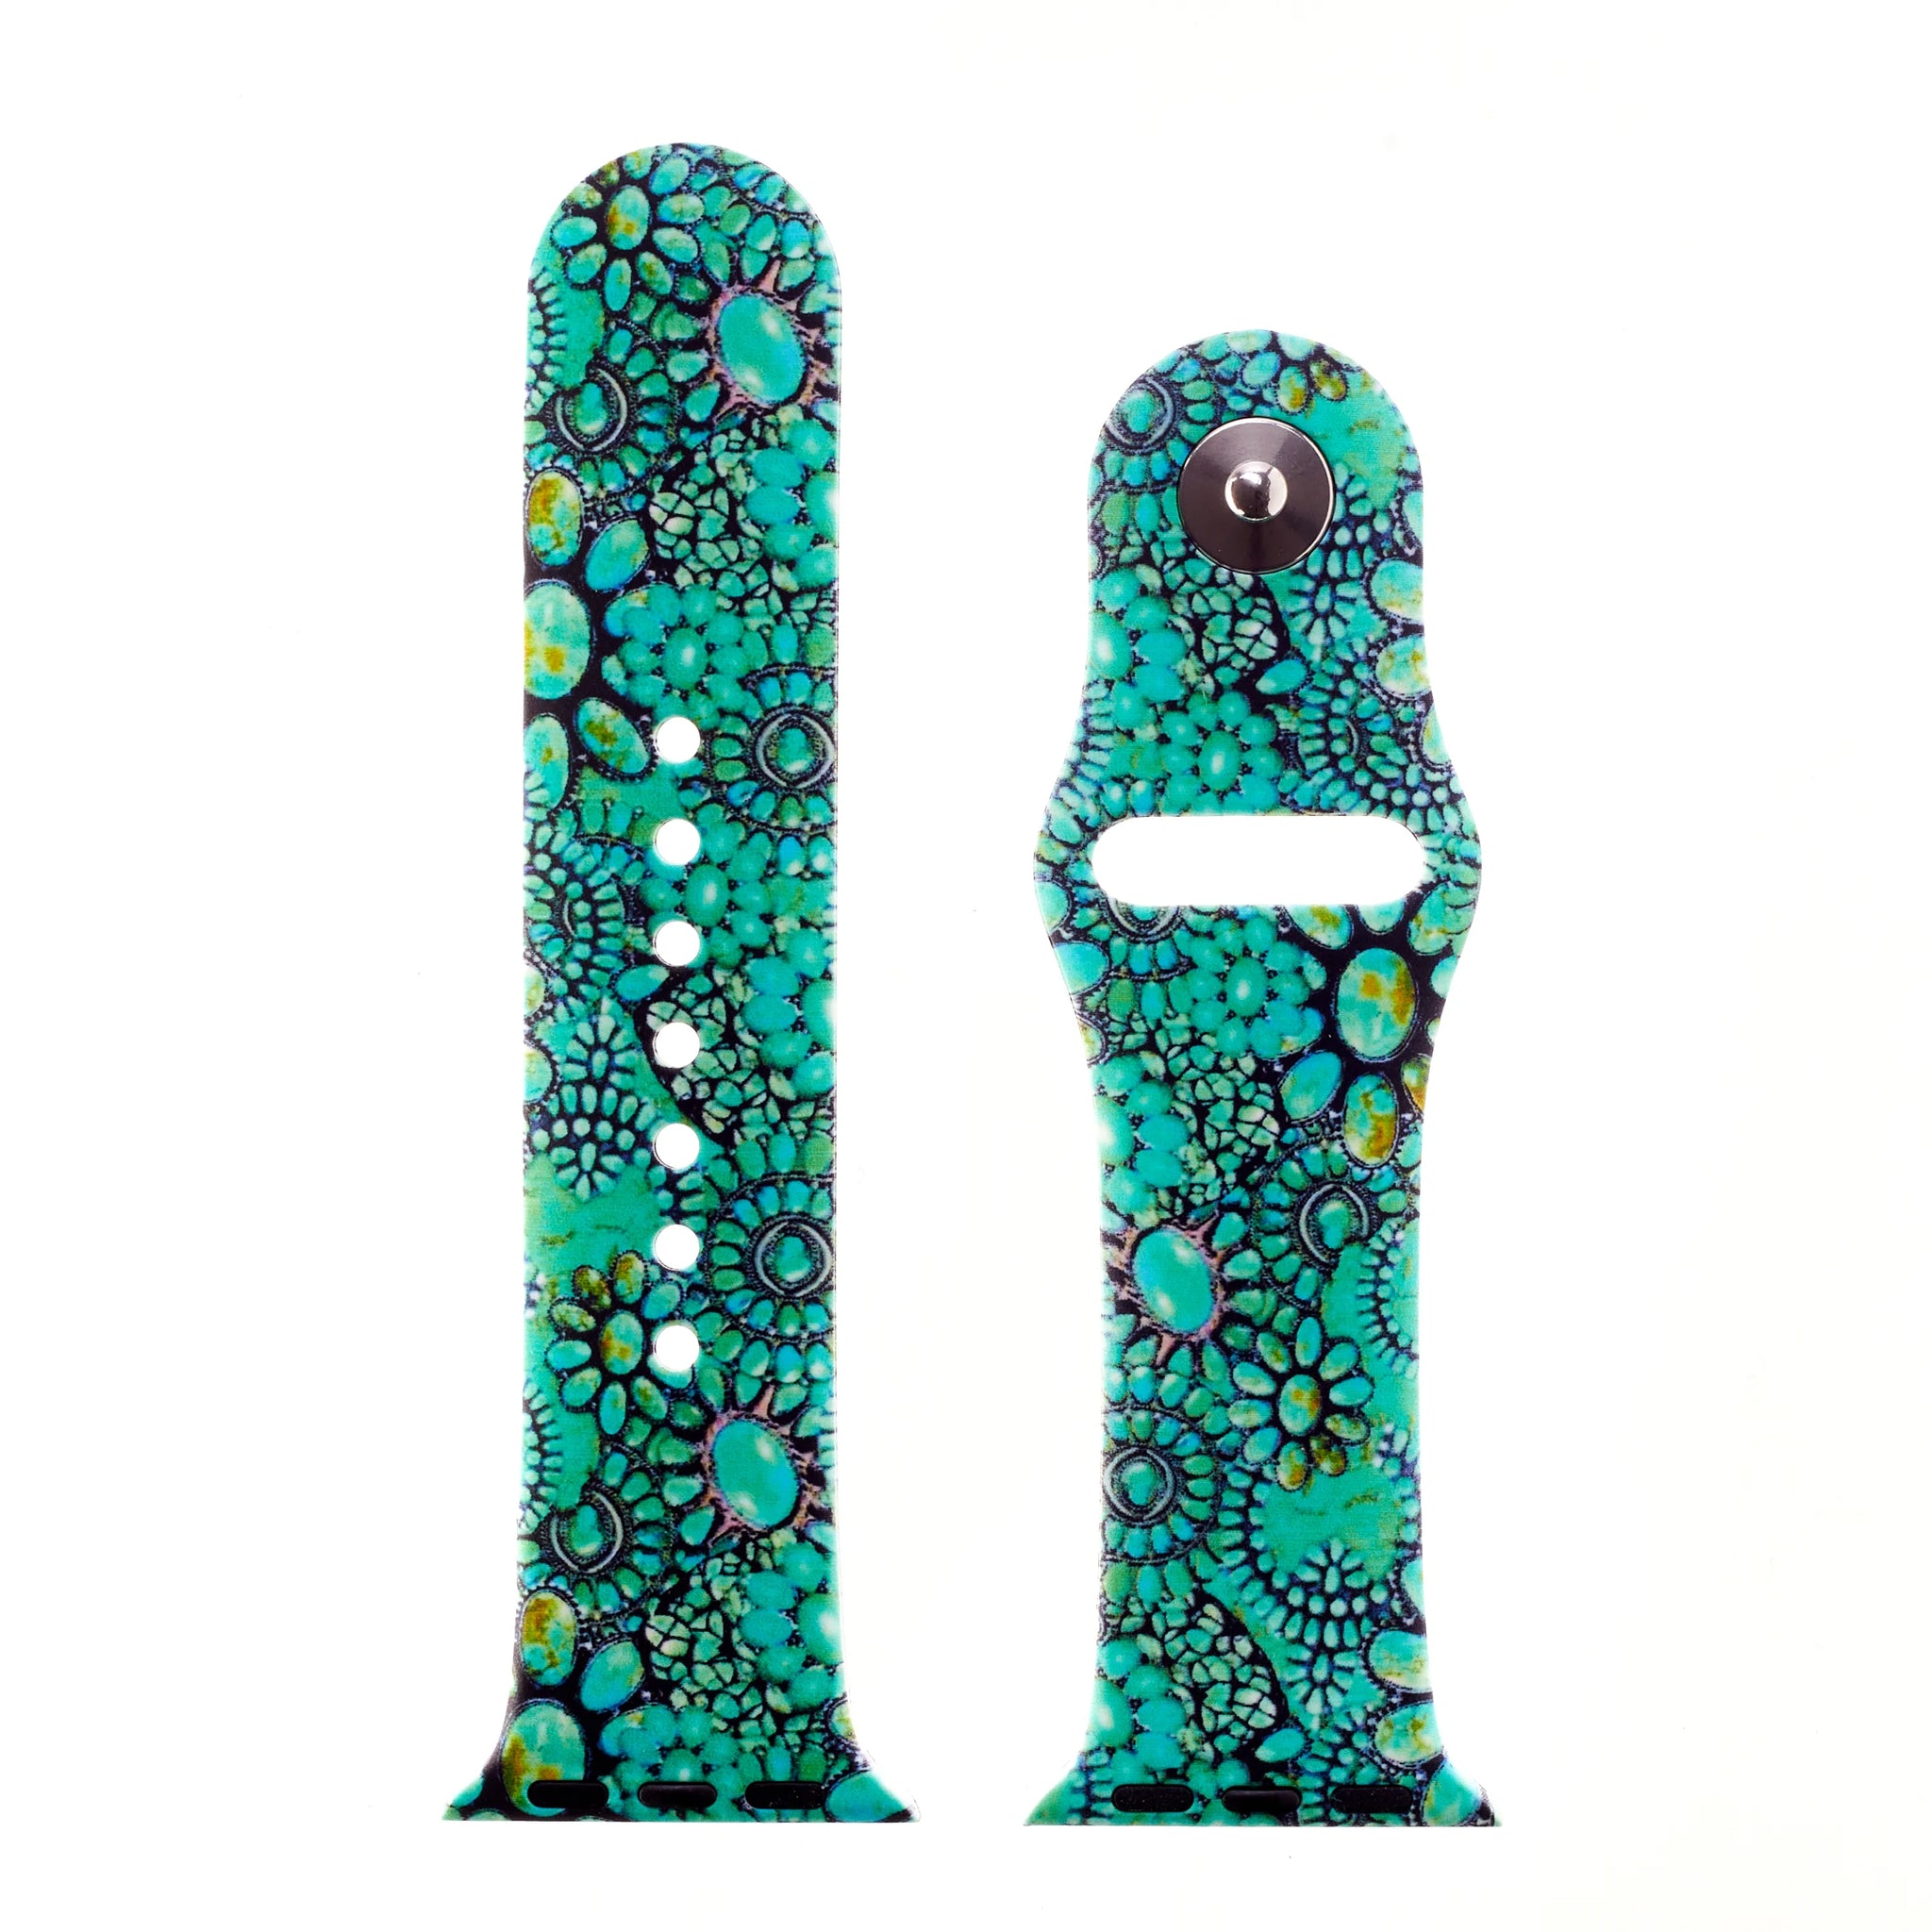 Turquoise Clusters Watch Band